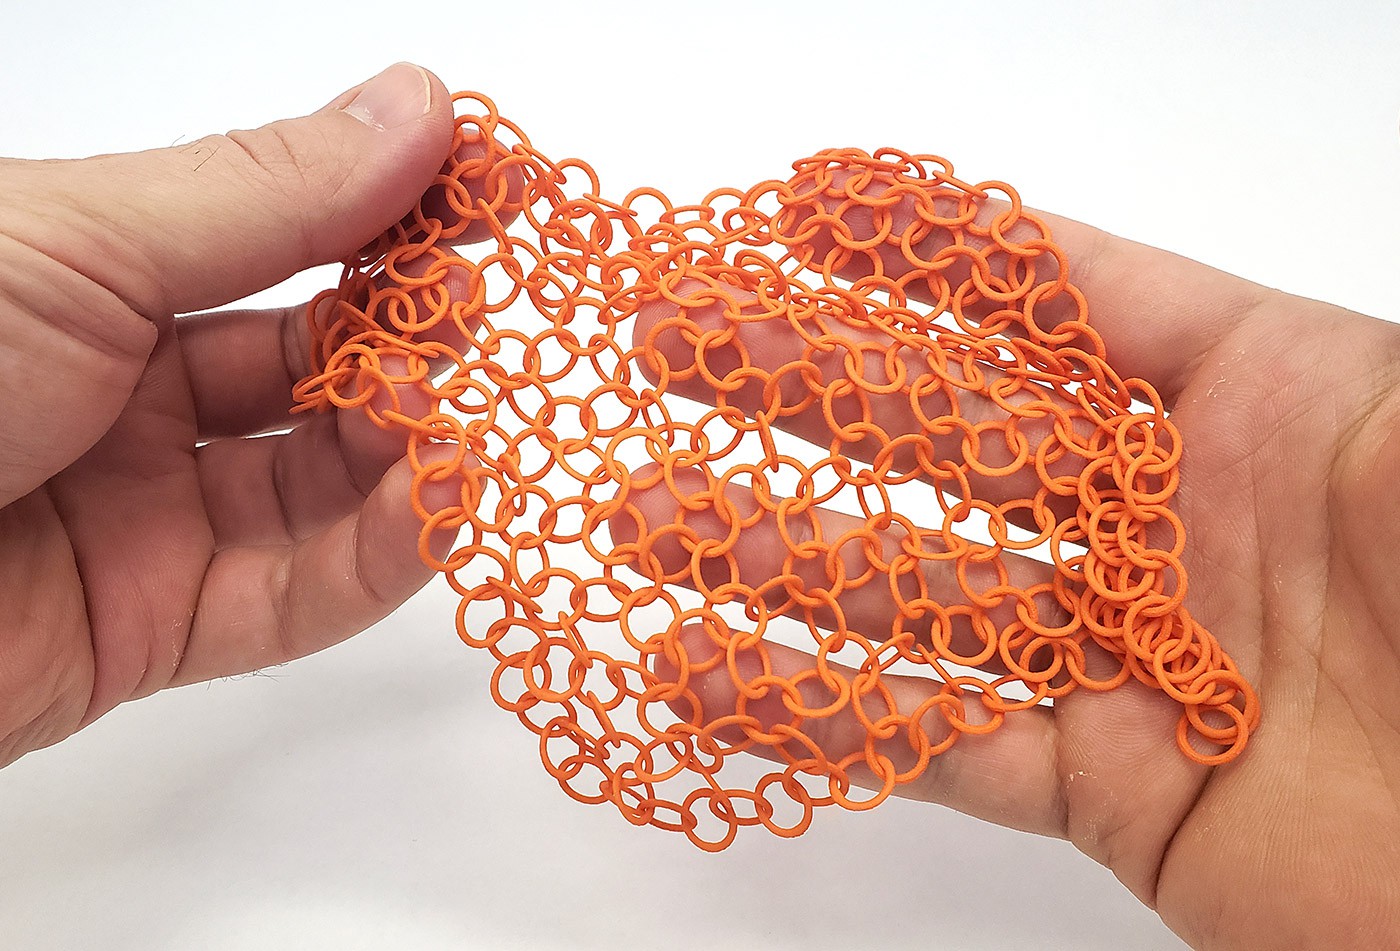 Two hands hold a piece of 3D printed fabric. The interlocking ring design makes a flexible material similar to chain mail.